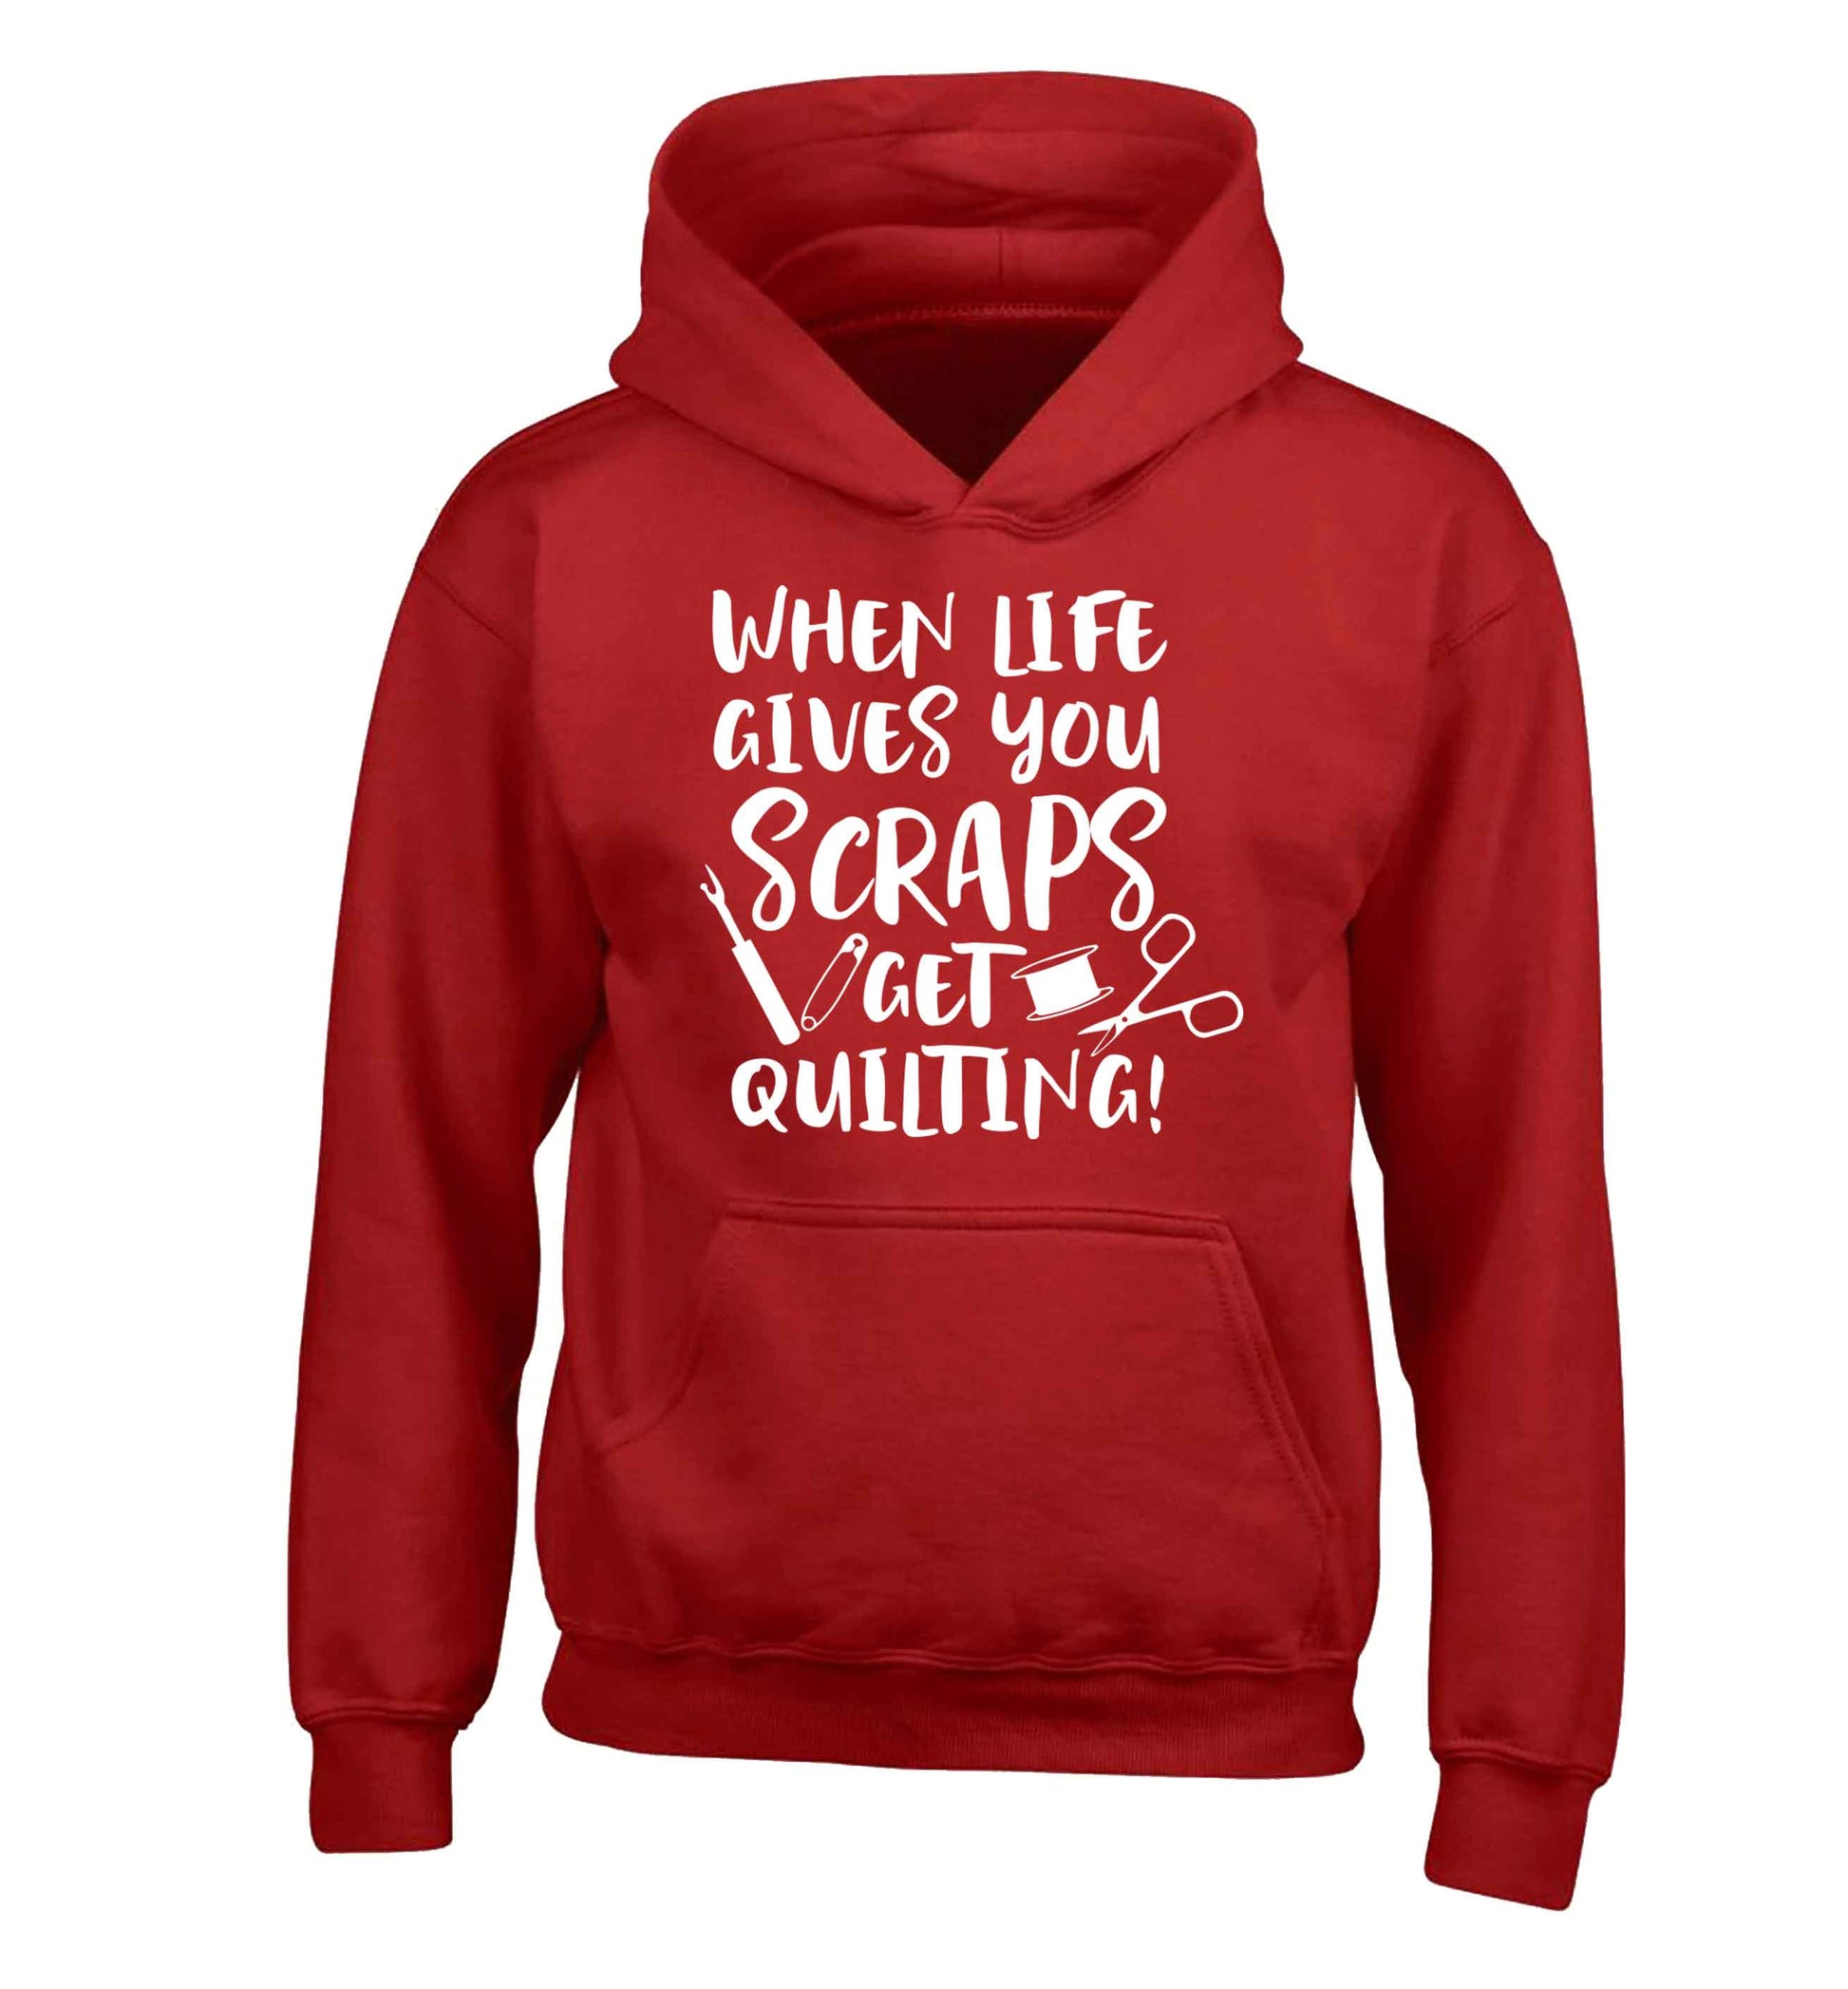 When life gives you scraps get quilting! children's red hoodie 12-13 Years